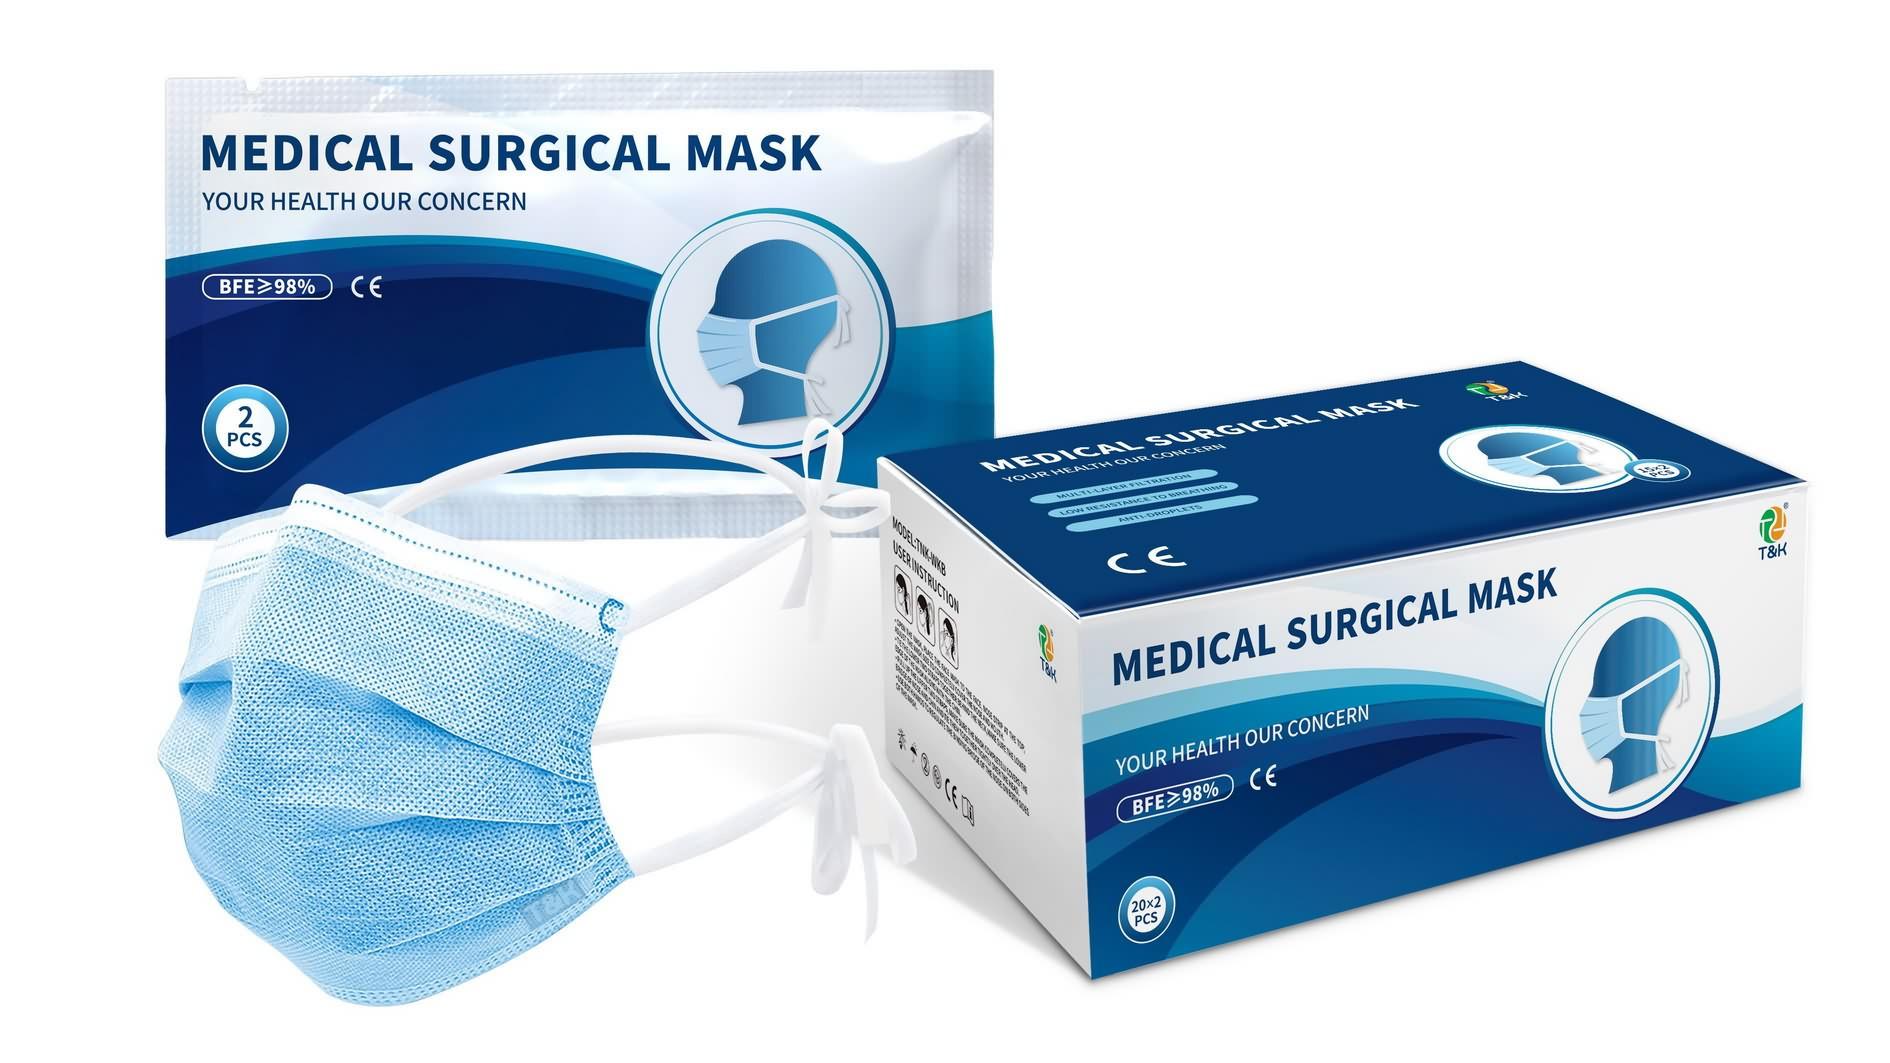 Type IIR Medical Surgical Mask (Tie-On)